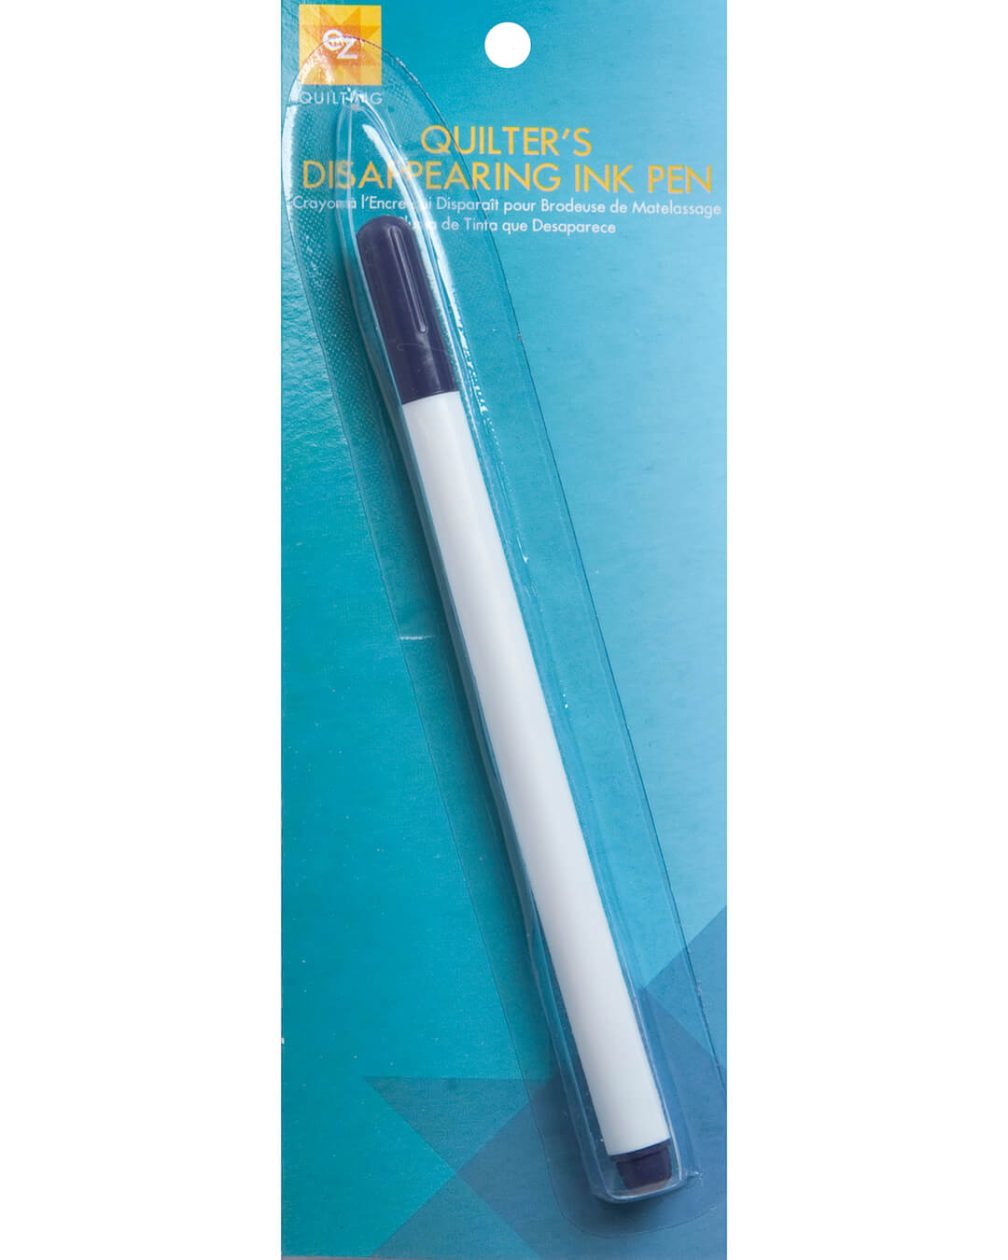 QUILTER'S DISAPPEARING INK PEN